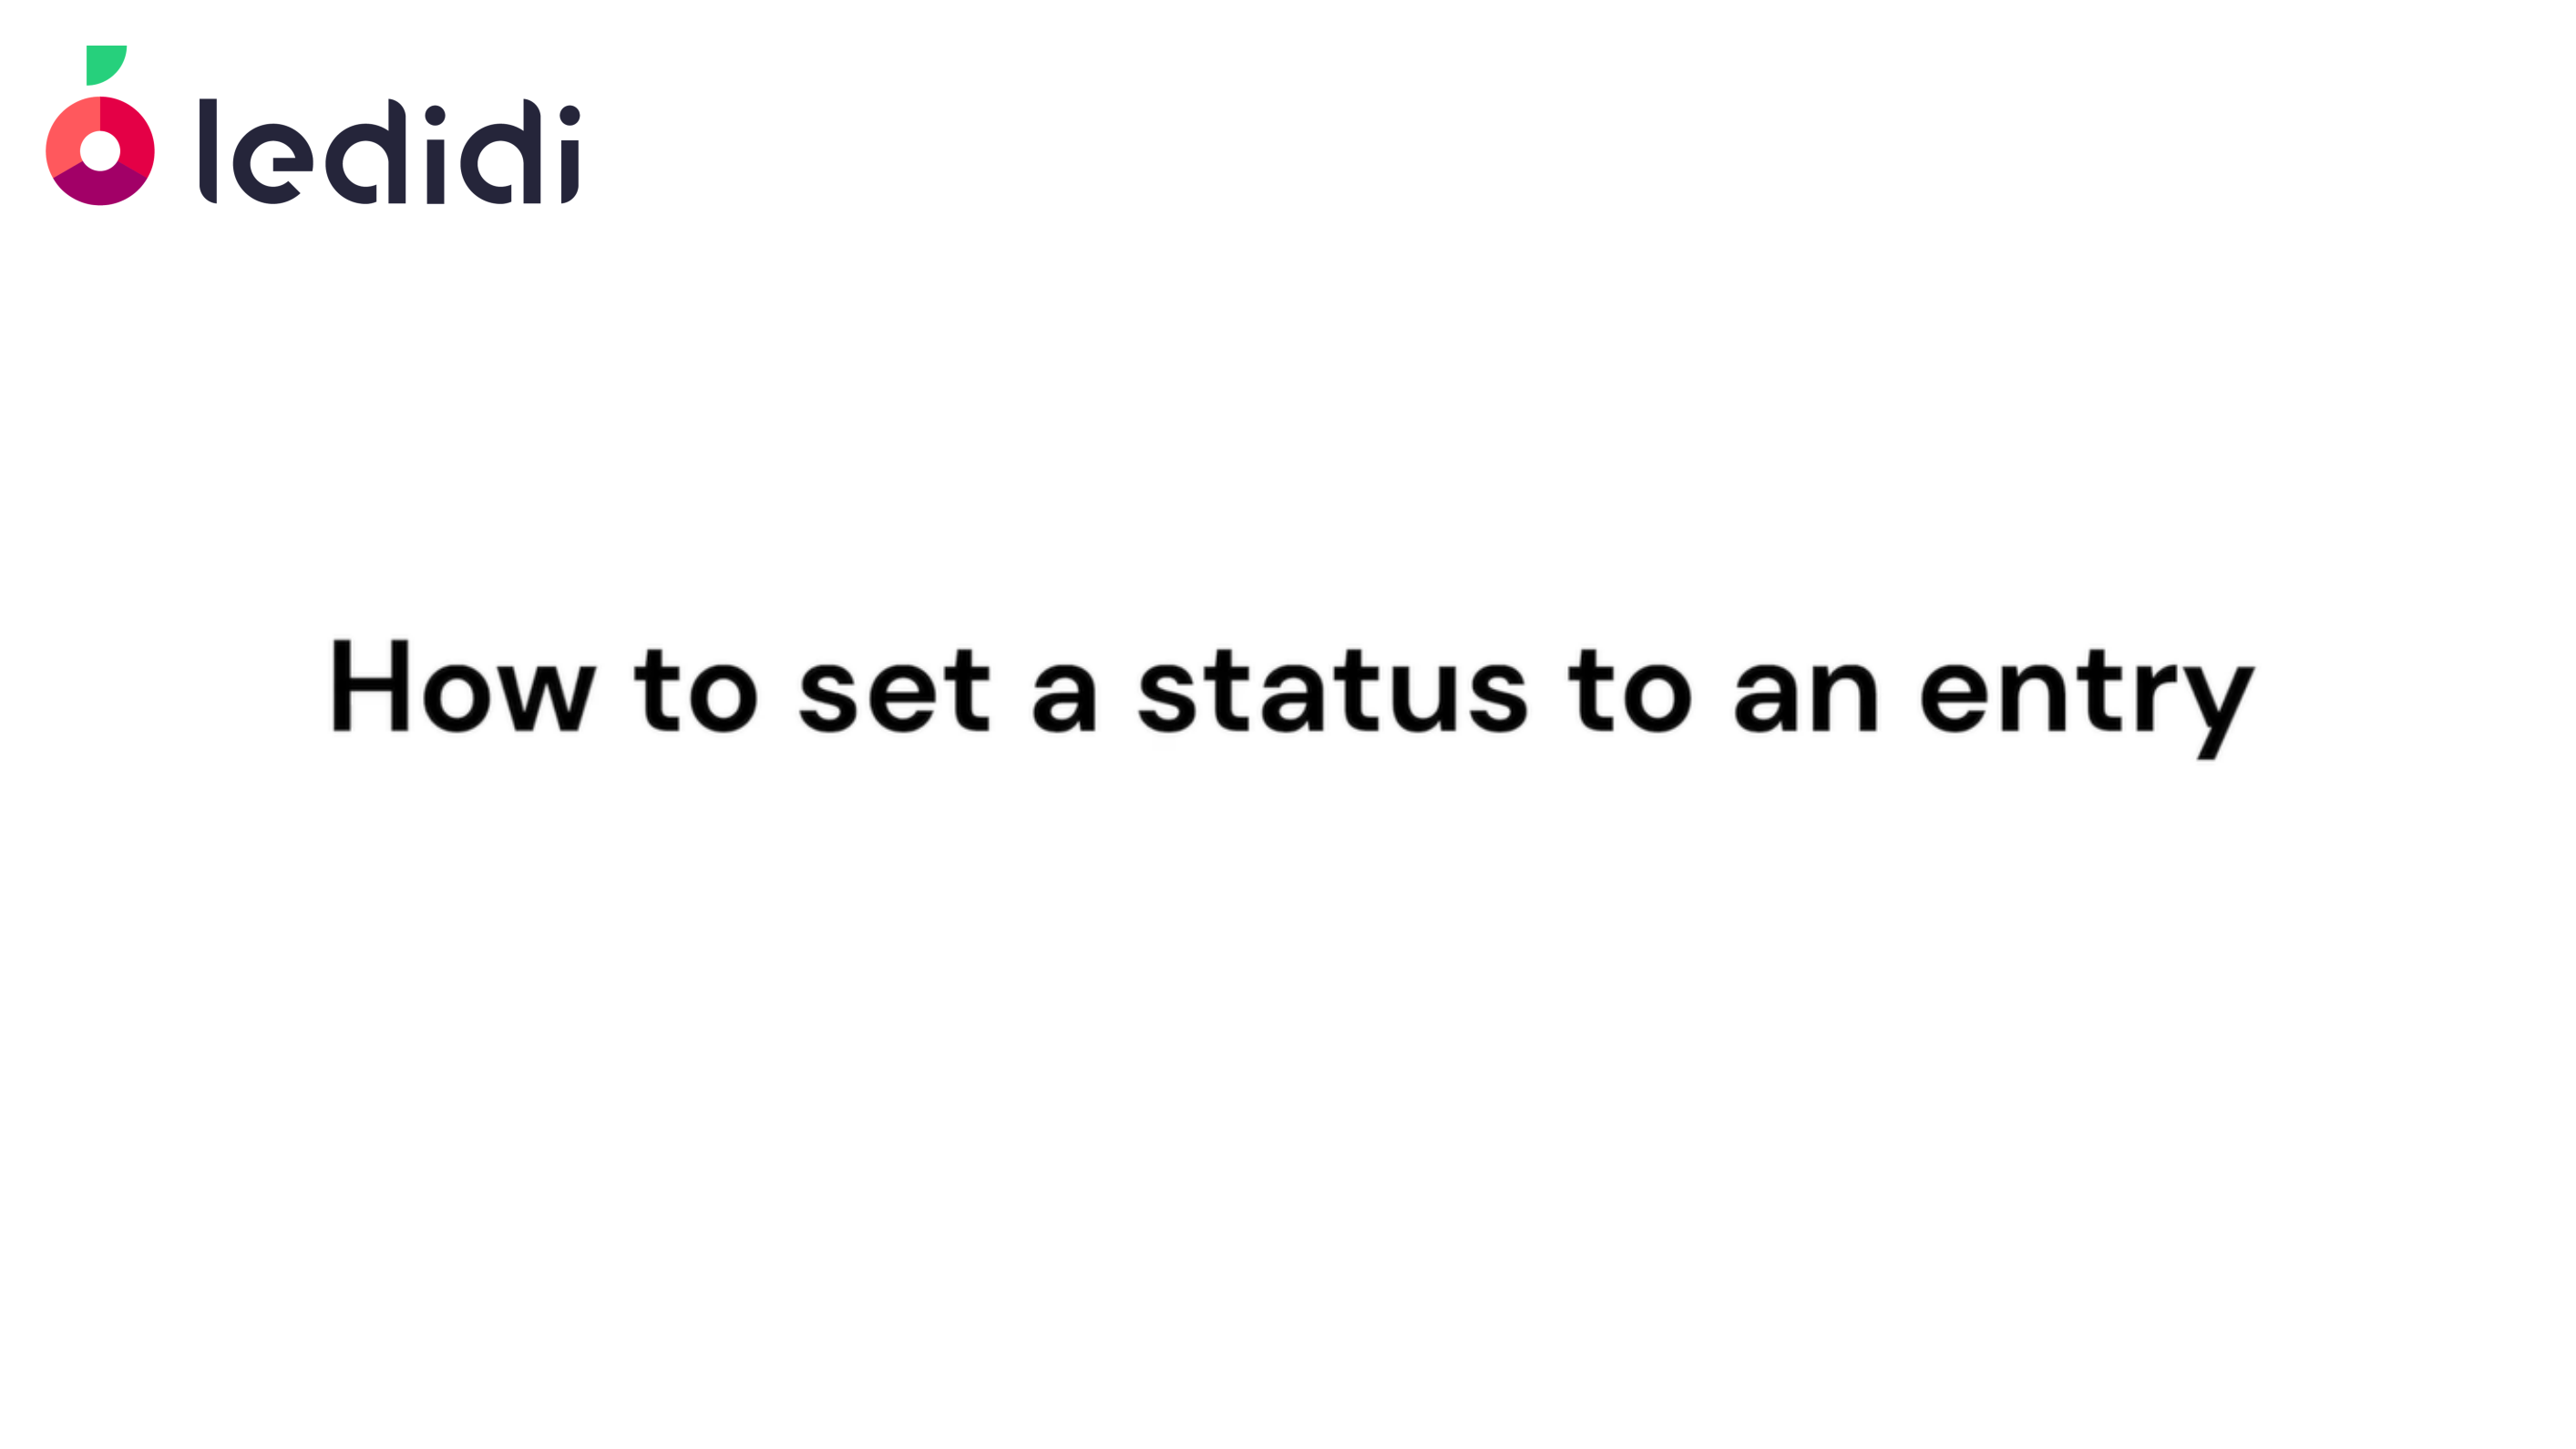 How to set a status to an entry